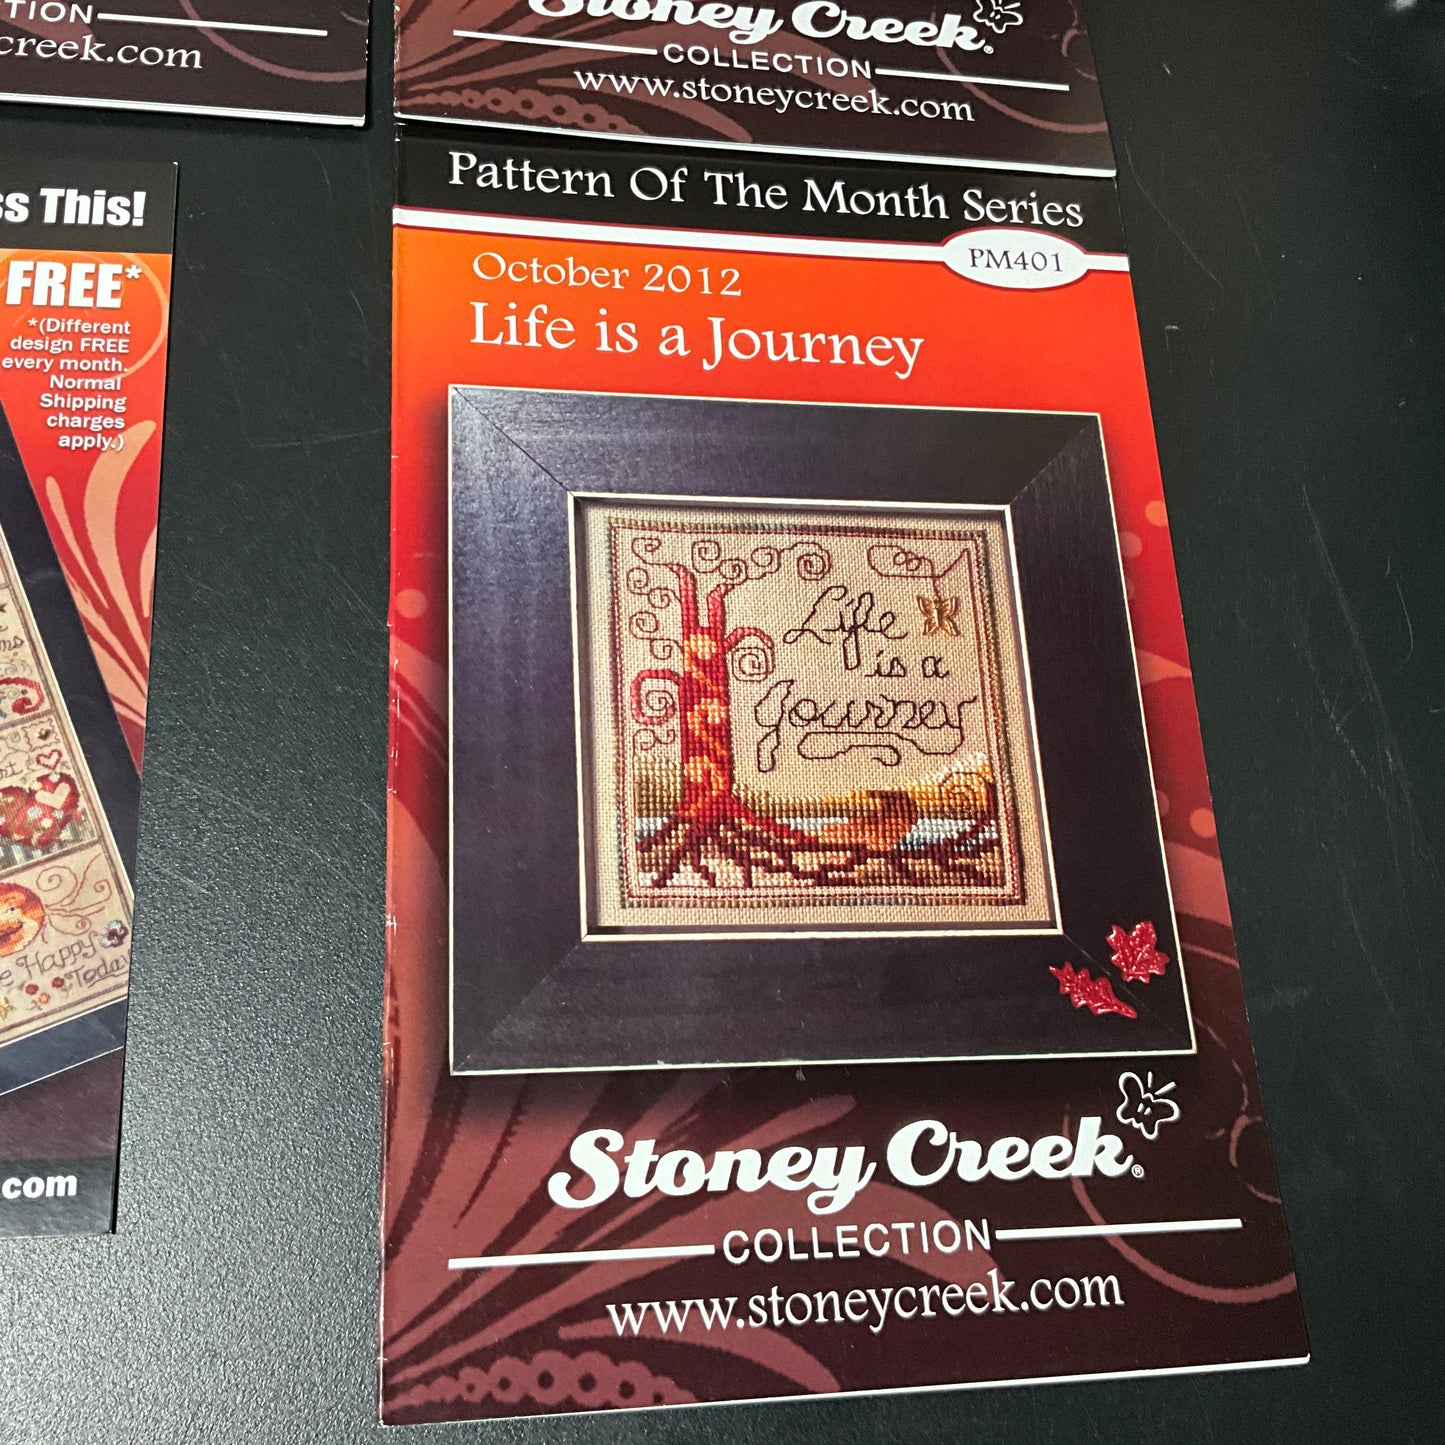 Stoney Creek Collection Pattern Of The Month Series st of 4 counted cross stitch charts see pictures and description*